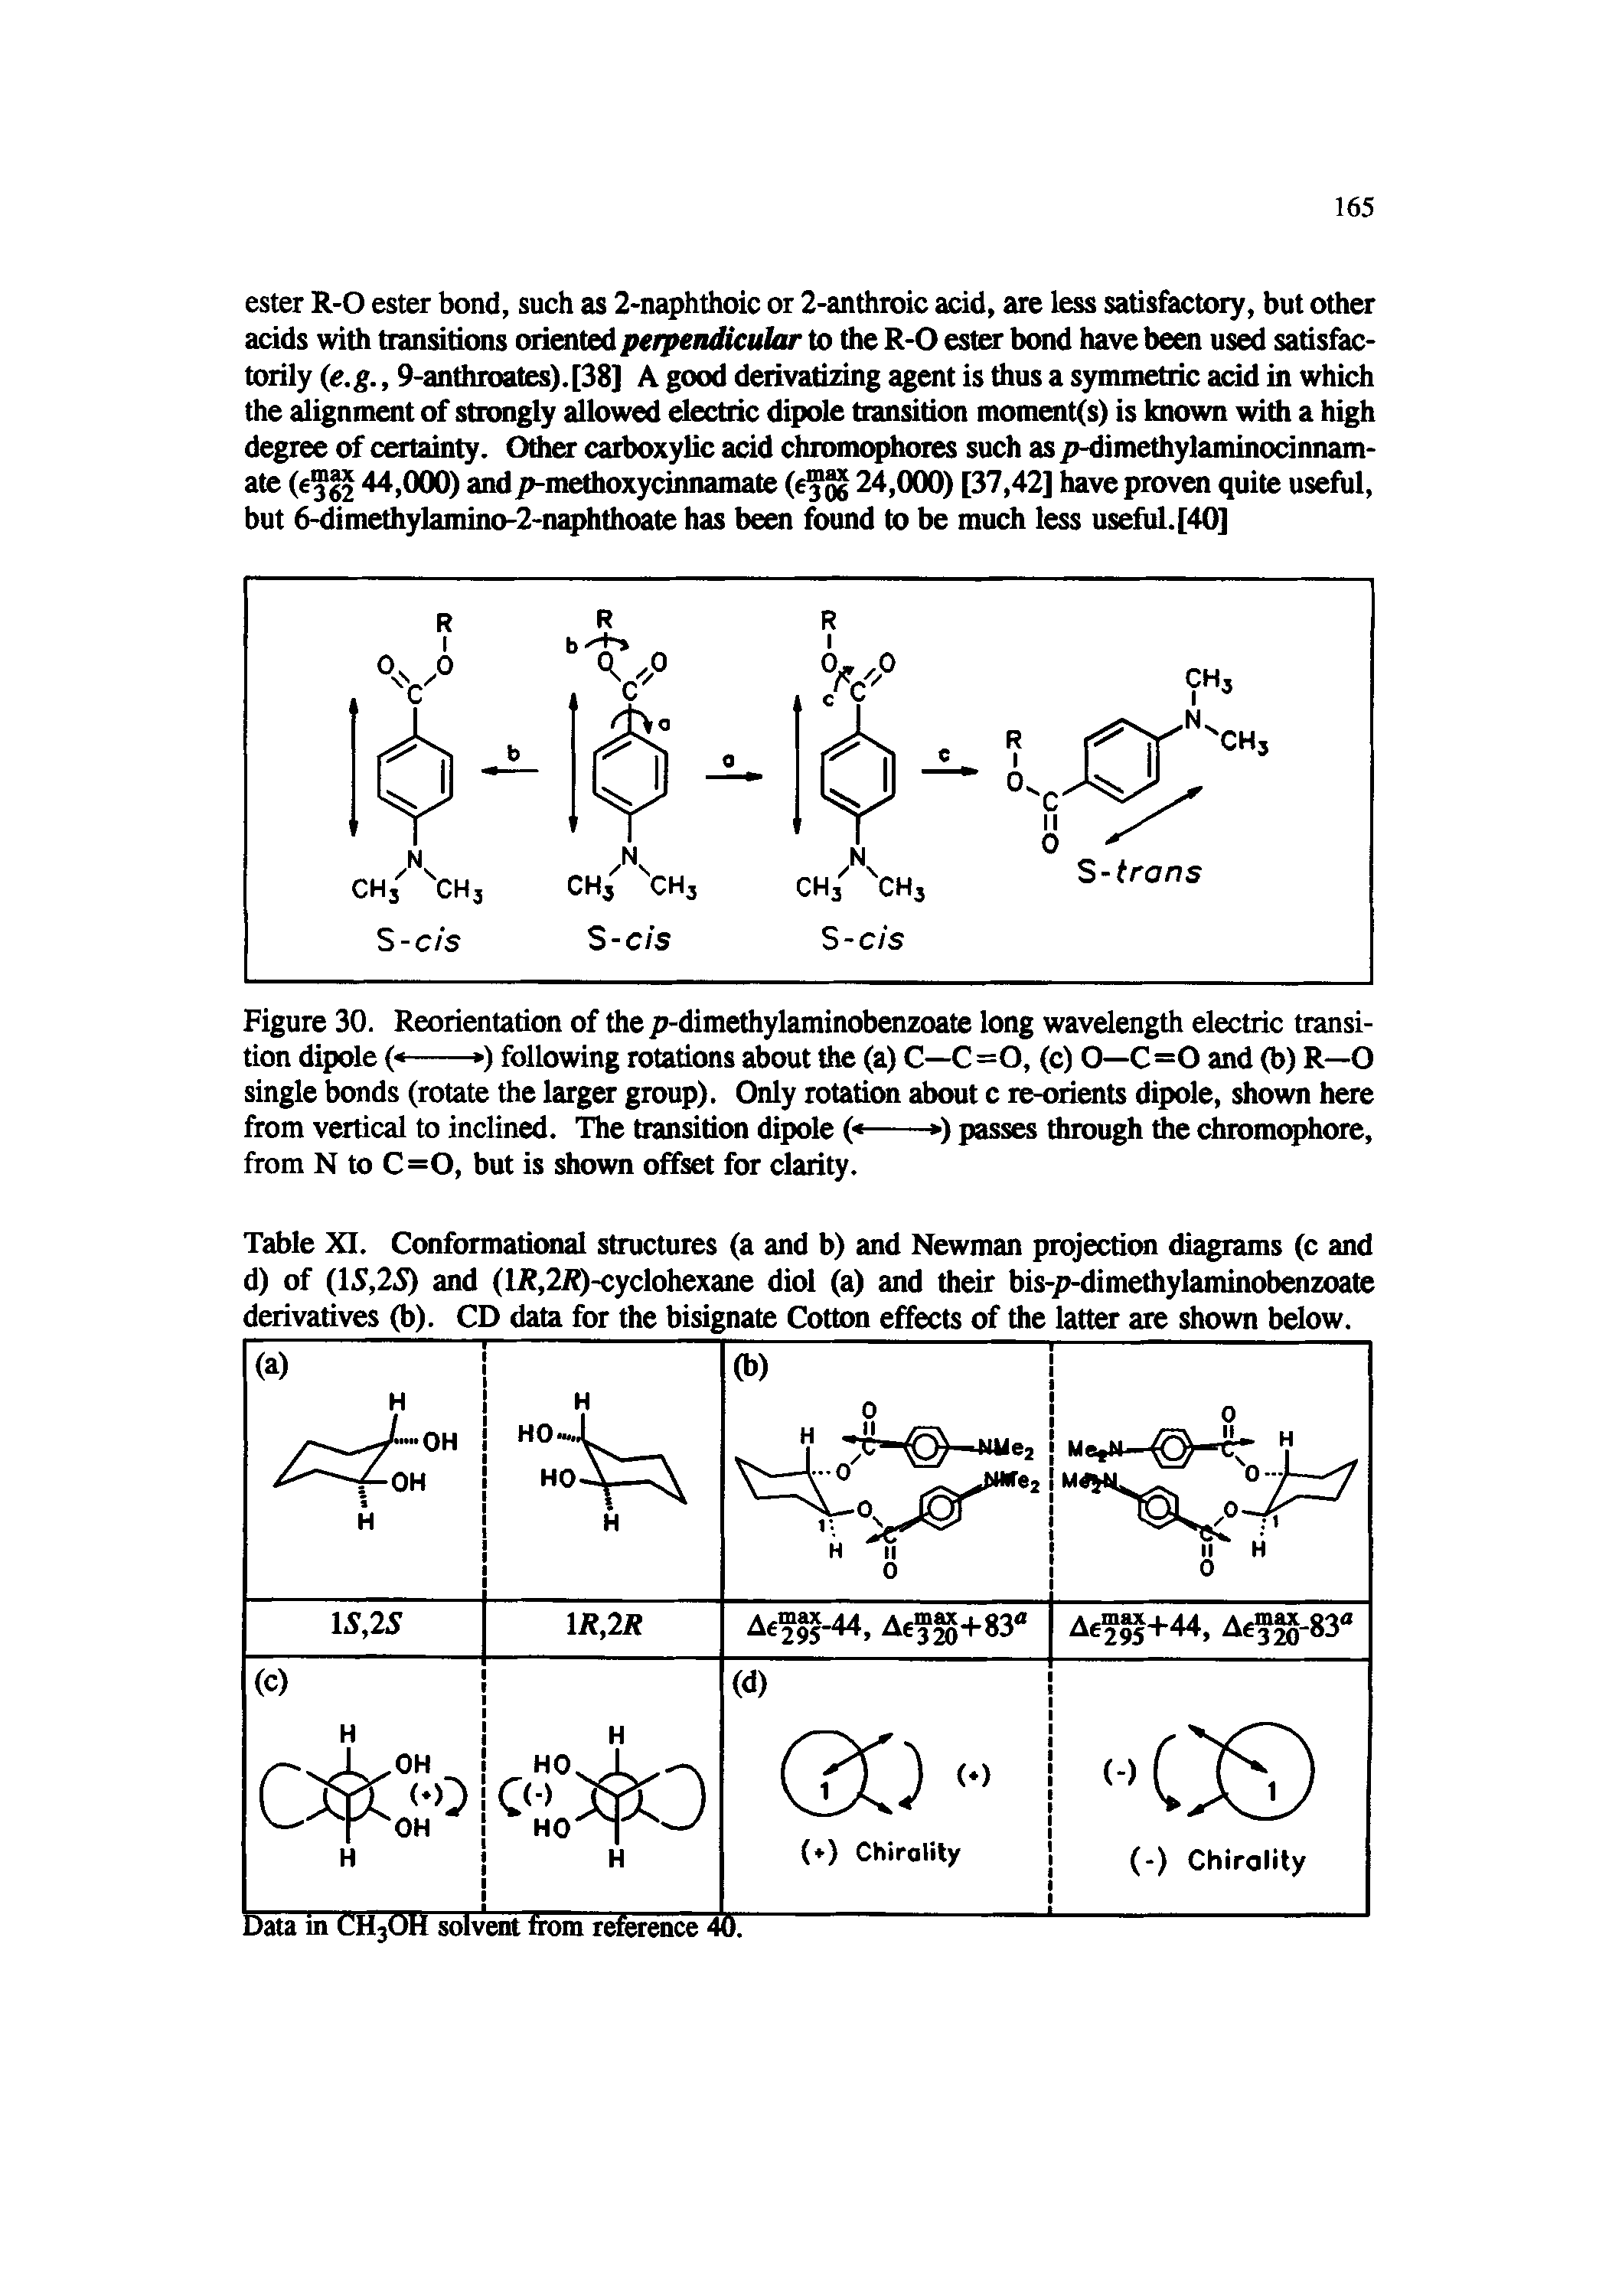 Table XI. Conformational structures (a and b) and Newman projection diagrams (c and d) of (15,25) and (lR,2R)-cyclohexane diol (a) and their bis-p-dimethylaminobenzoate derivatives (b). CD data for the bisignate Cotton effects of the latter are shown below.